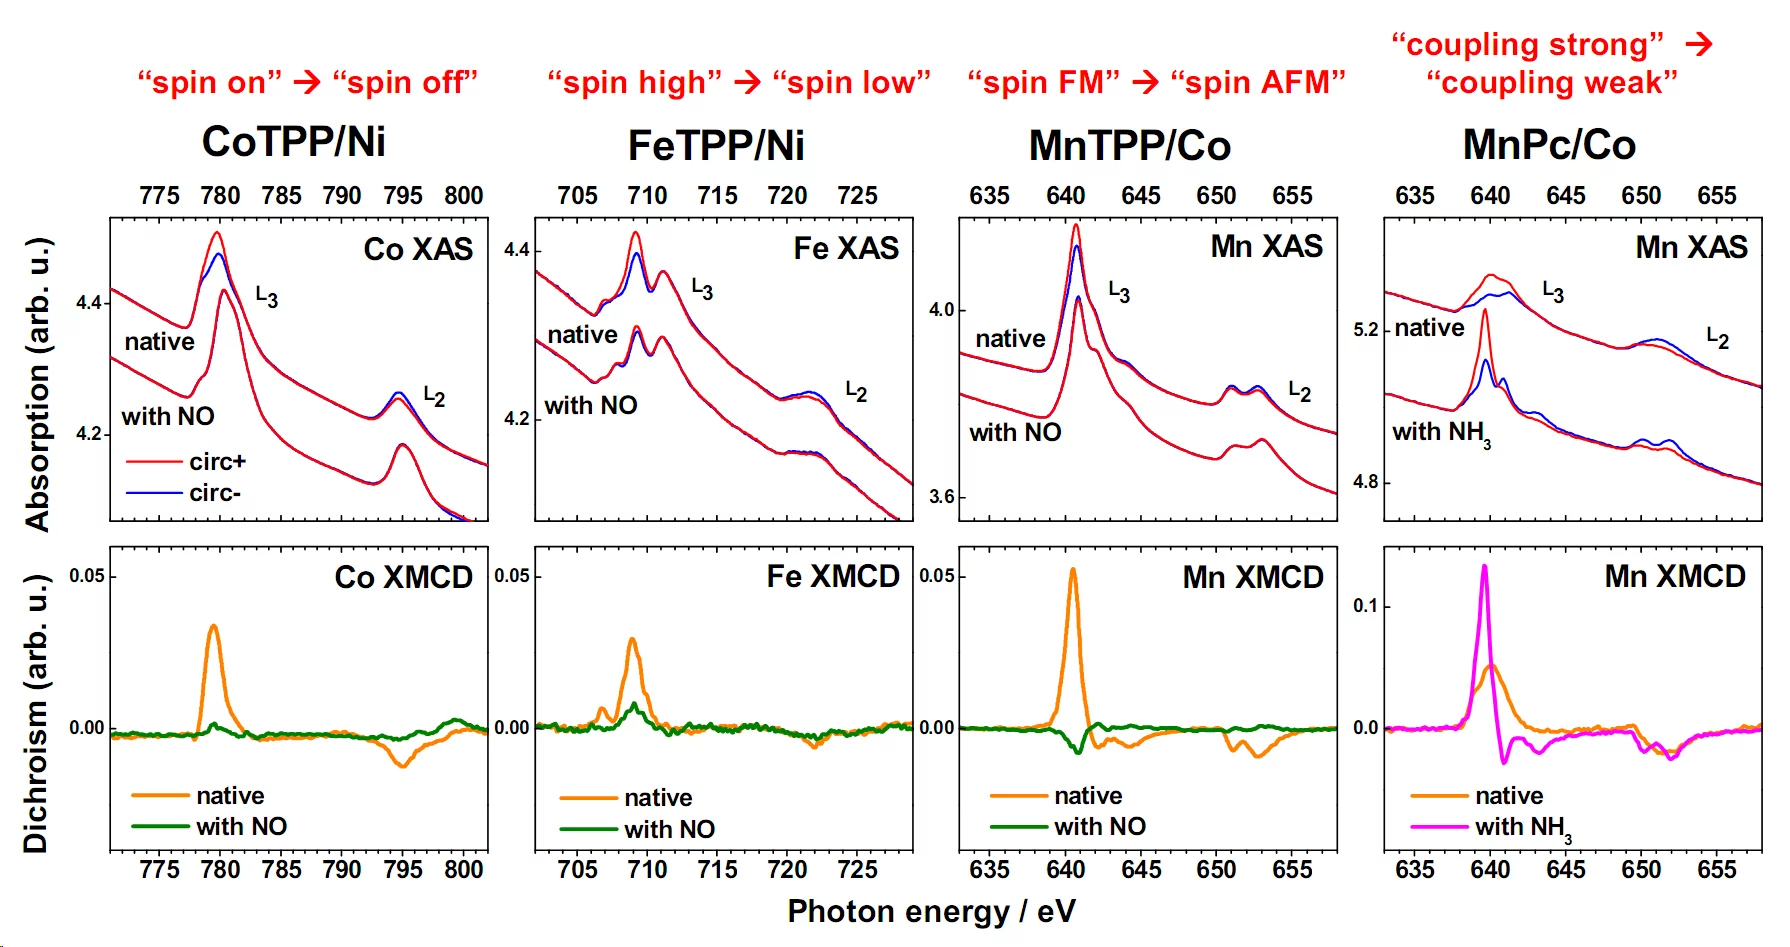 Fig. 2 XAS/XMCD showing the different novel magnetochemical effects observed on surface: 'spin on' to 'spin off', 'spin high' to 'spin low', 'spin FM' to 'spin AFM' and 'coupling strong' to 'coupling weak'.